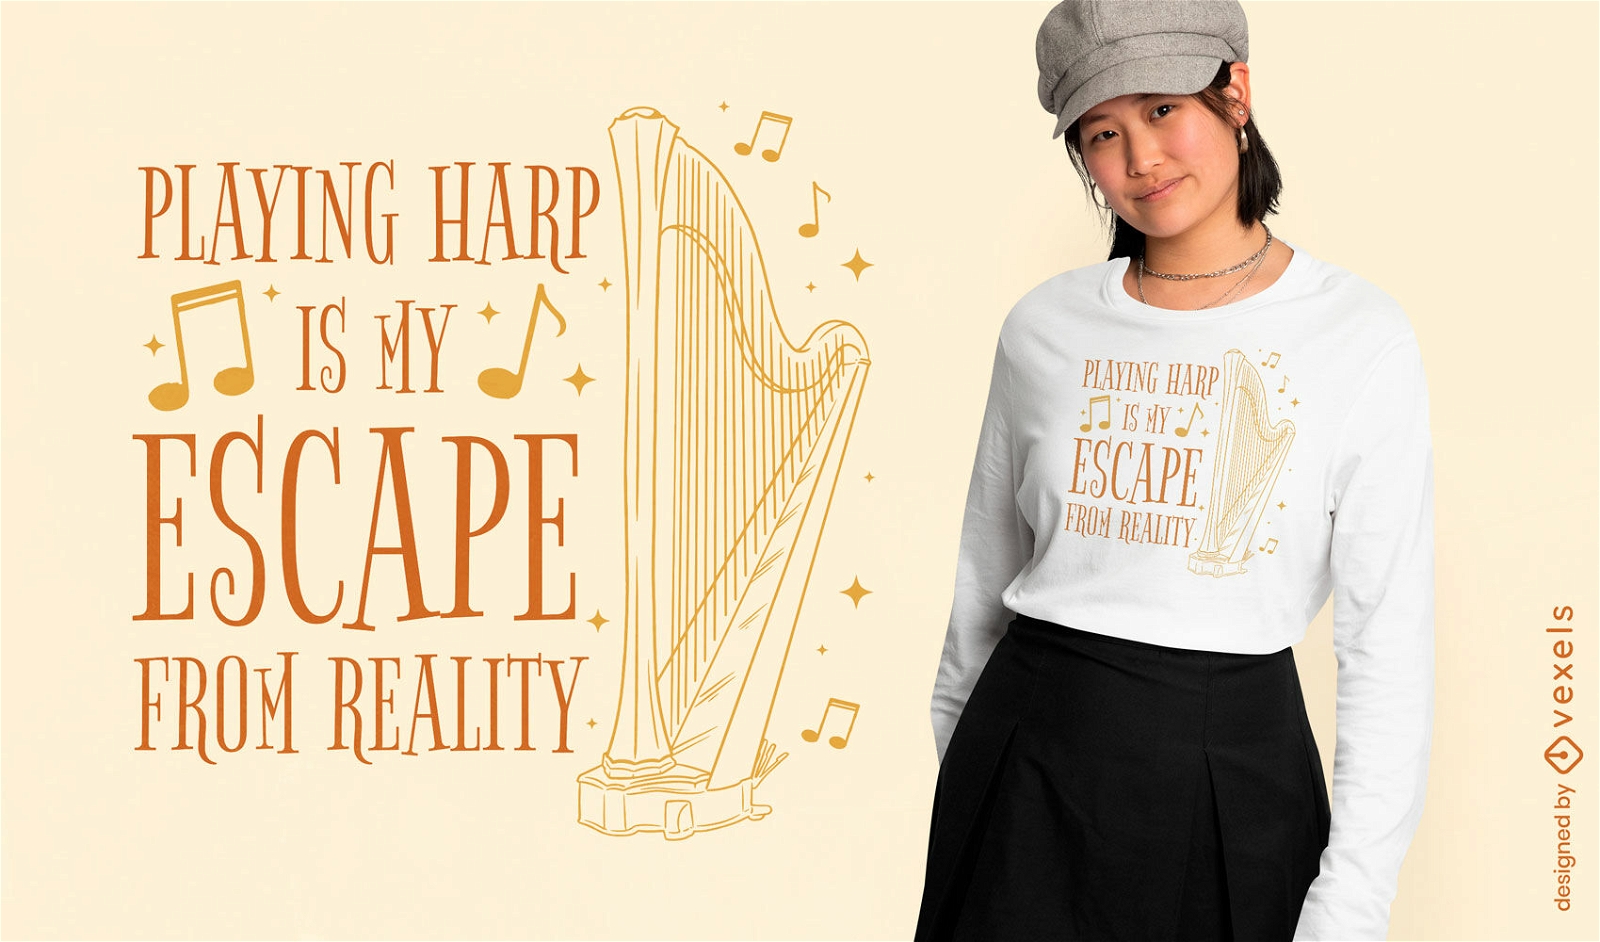 Playing harp quote t-shirt design